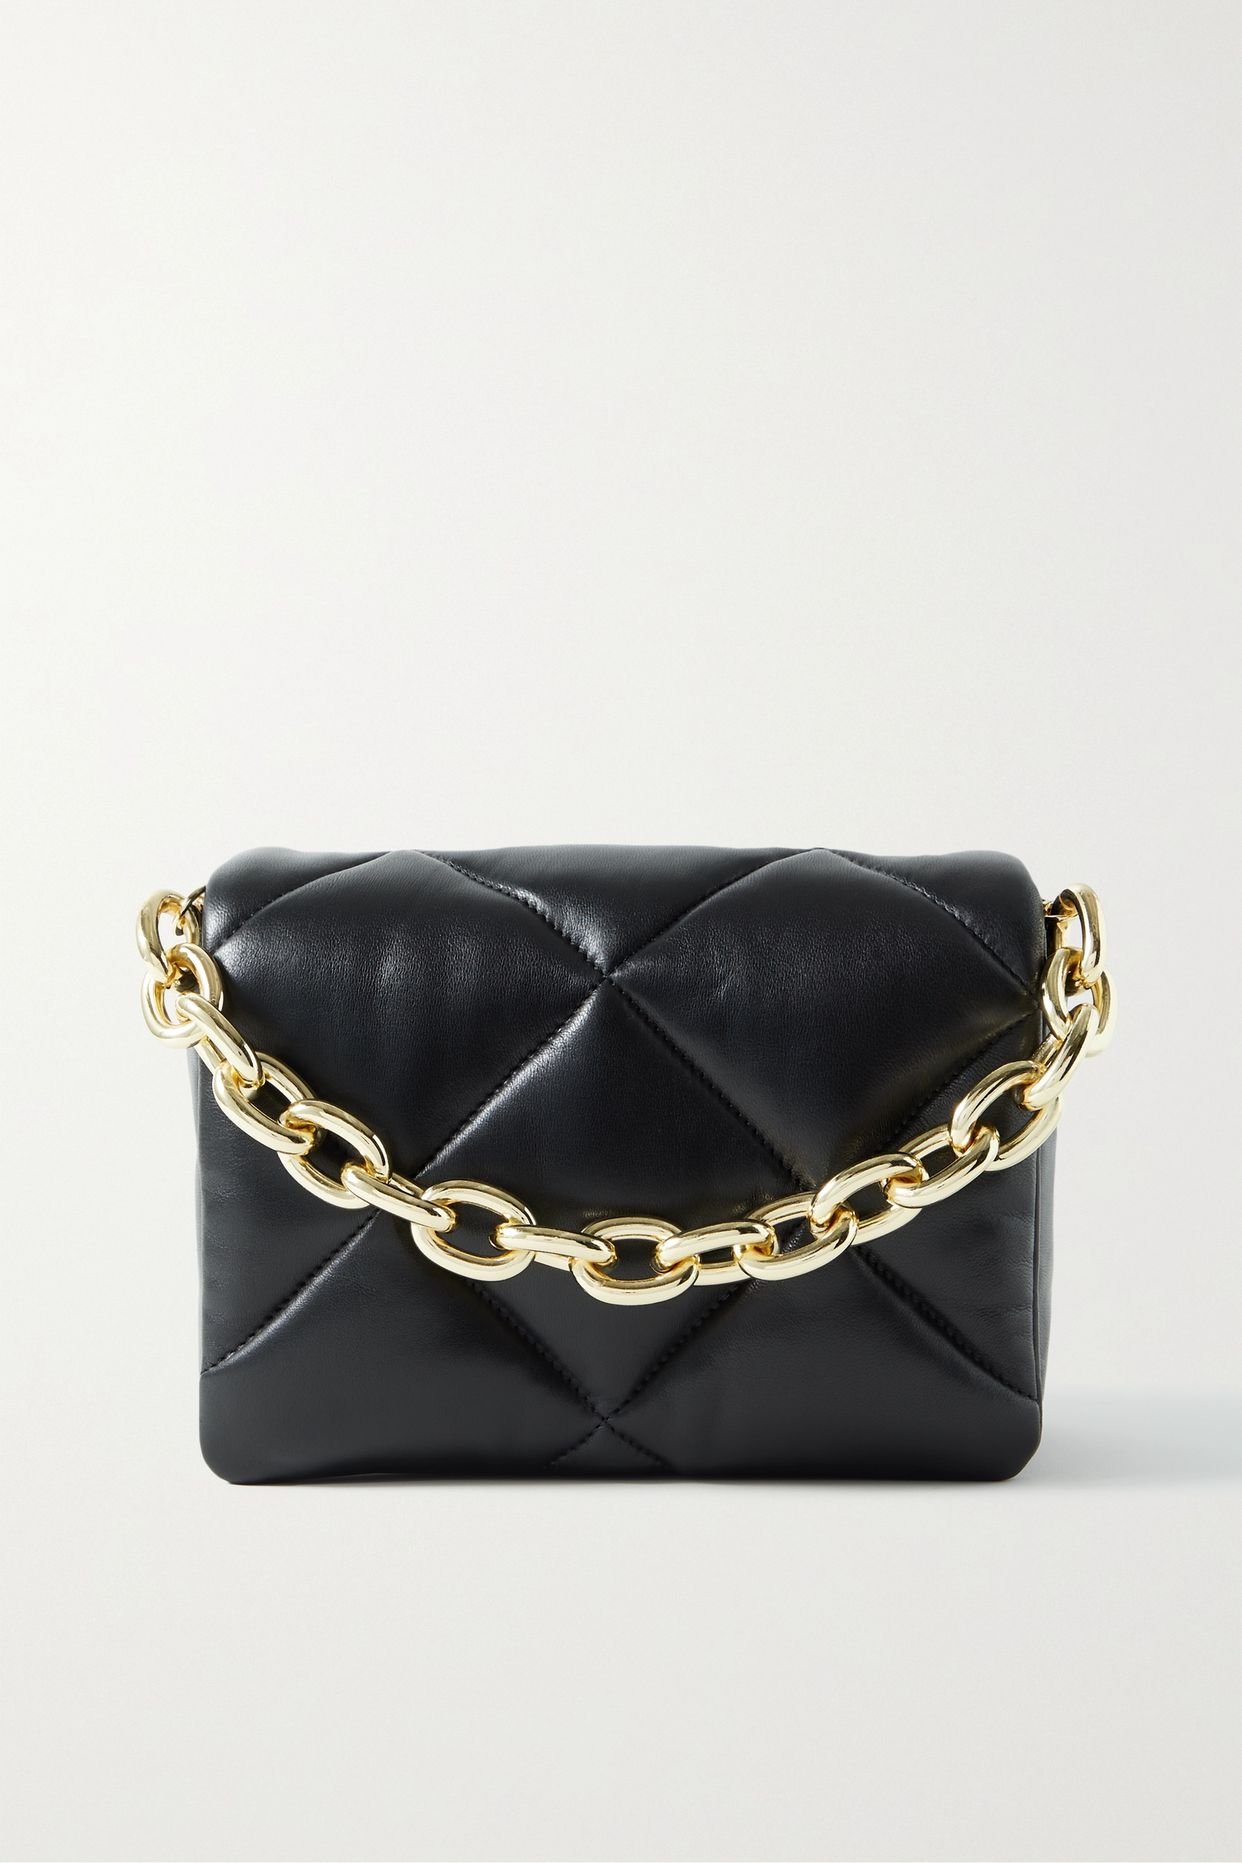 STAND STUDIO - Brynn quilted leather shoulder bag